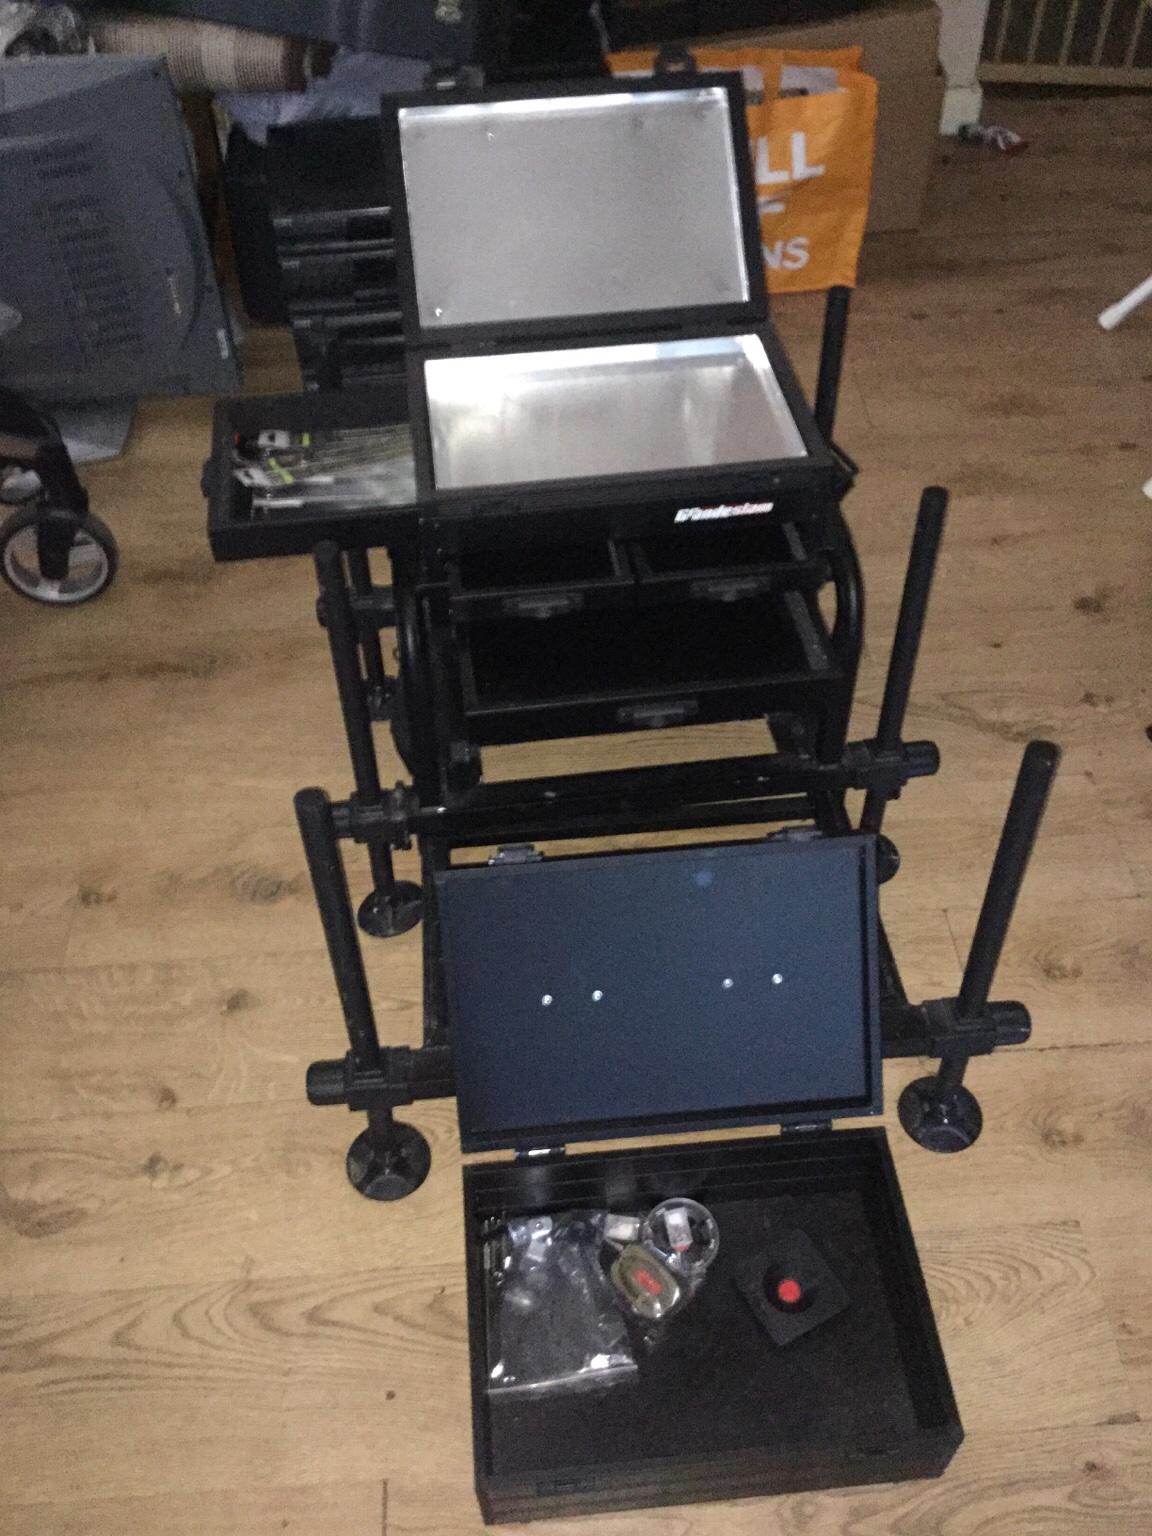 Grand slam fishing seat box in L21 Sefton for £65.00 for sale